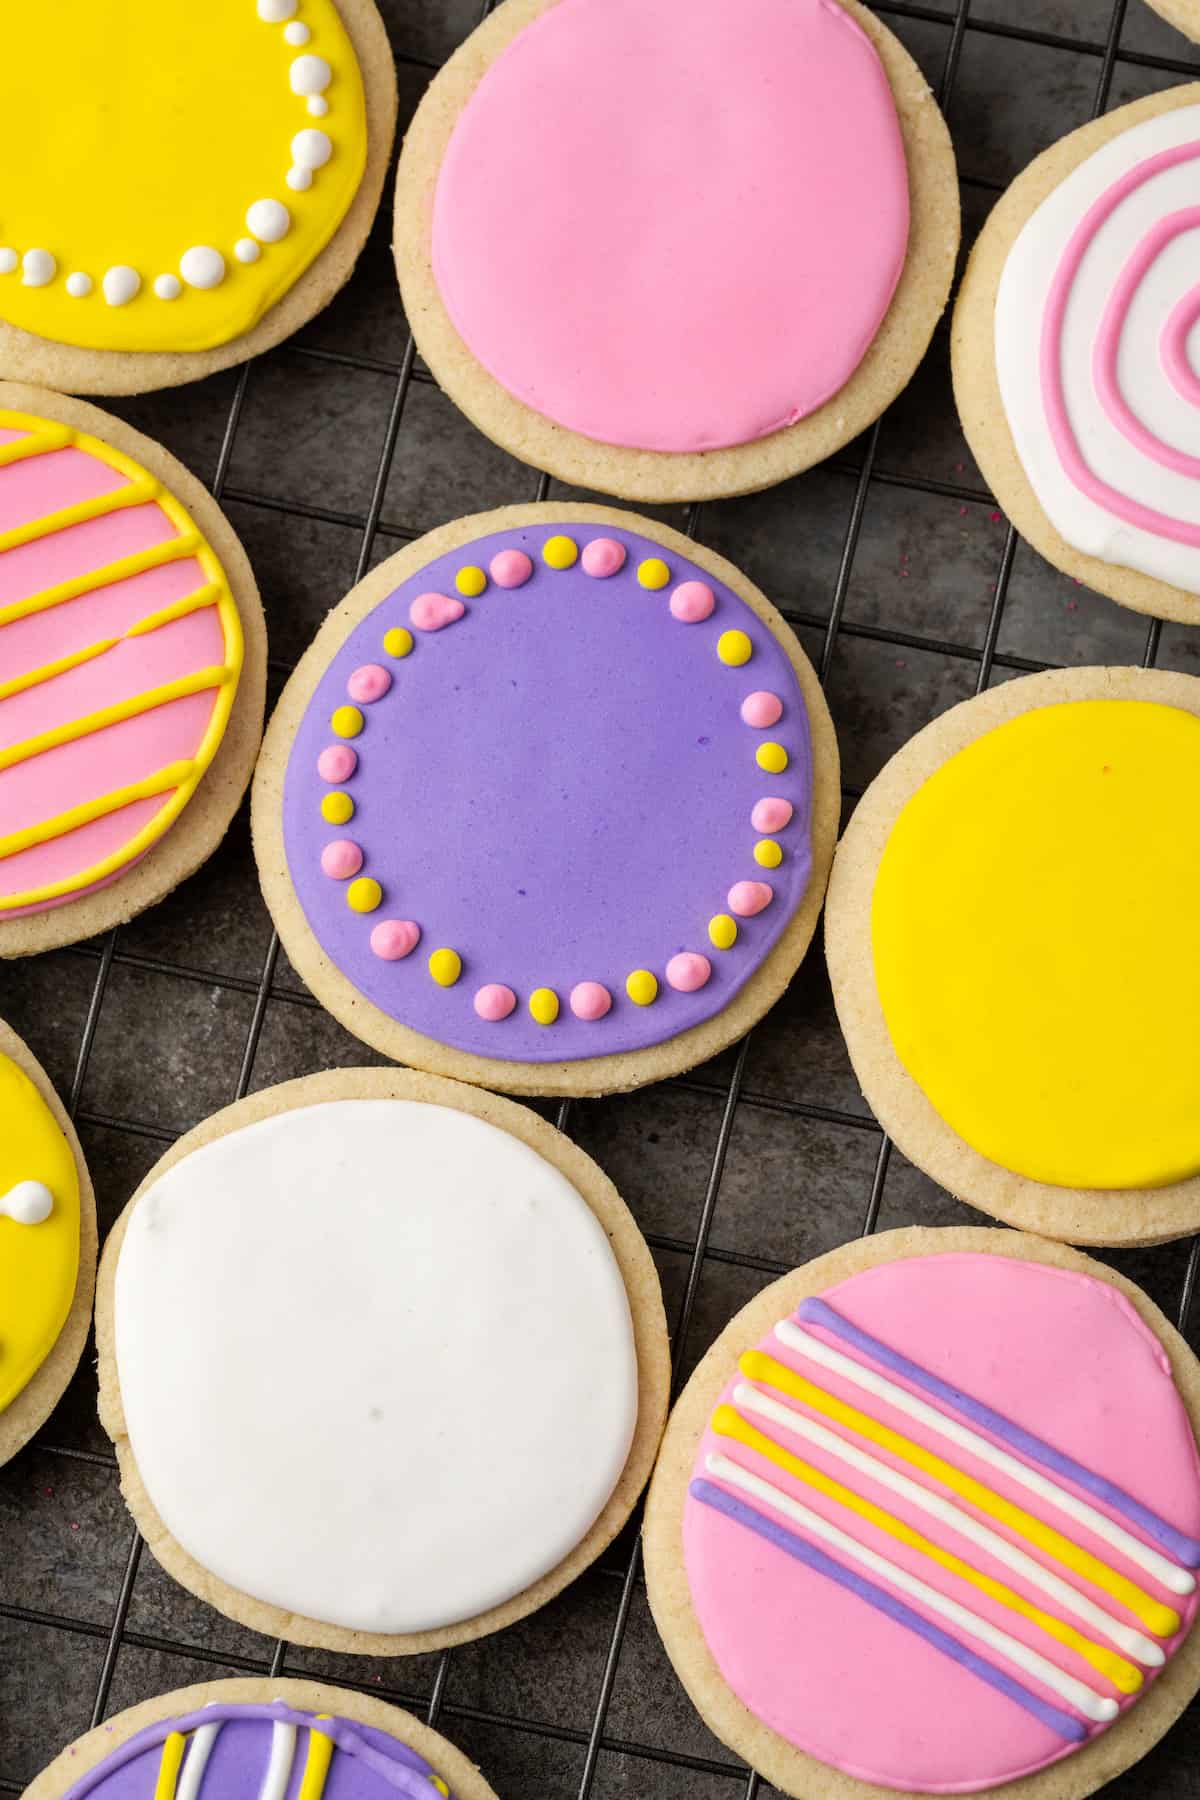 Overhead view of assorted round sugar cookies decorated with royal icing in different colors.